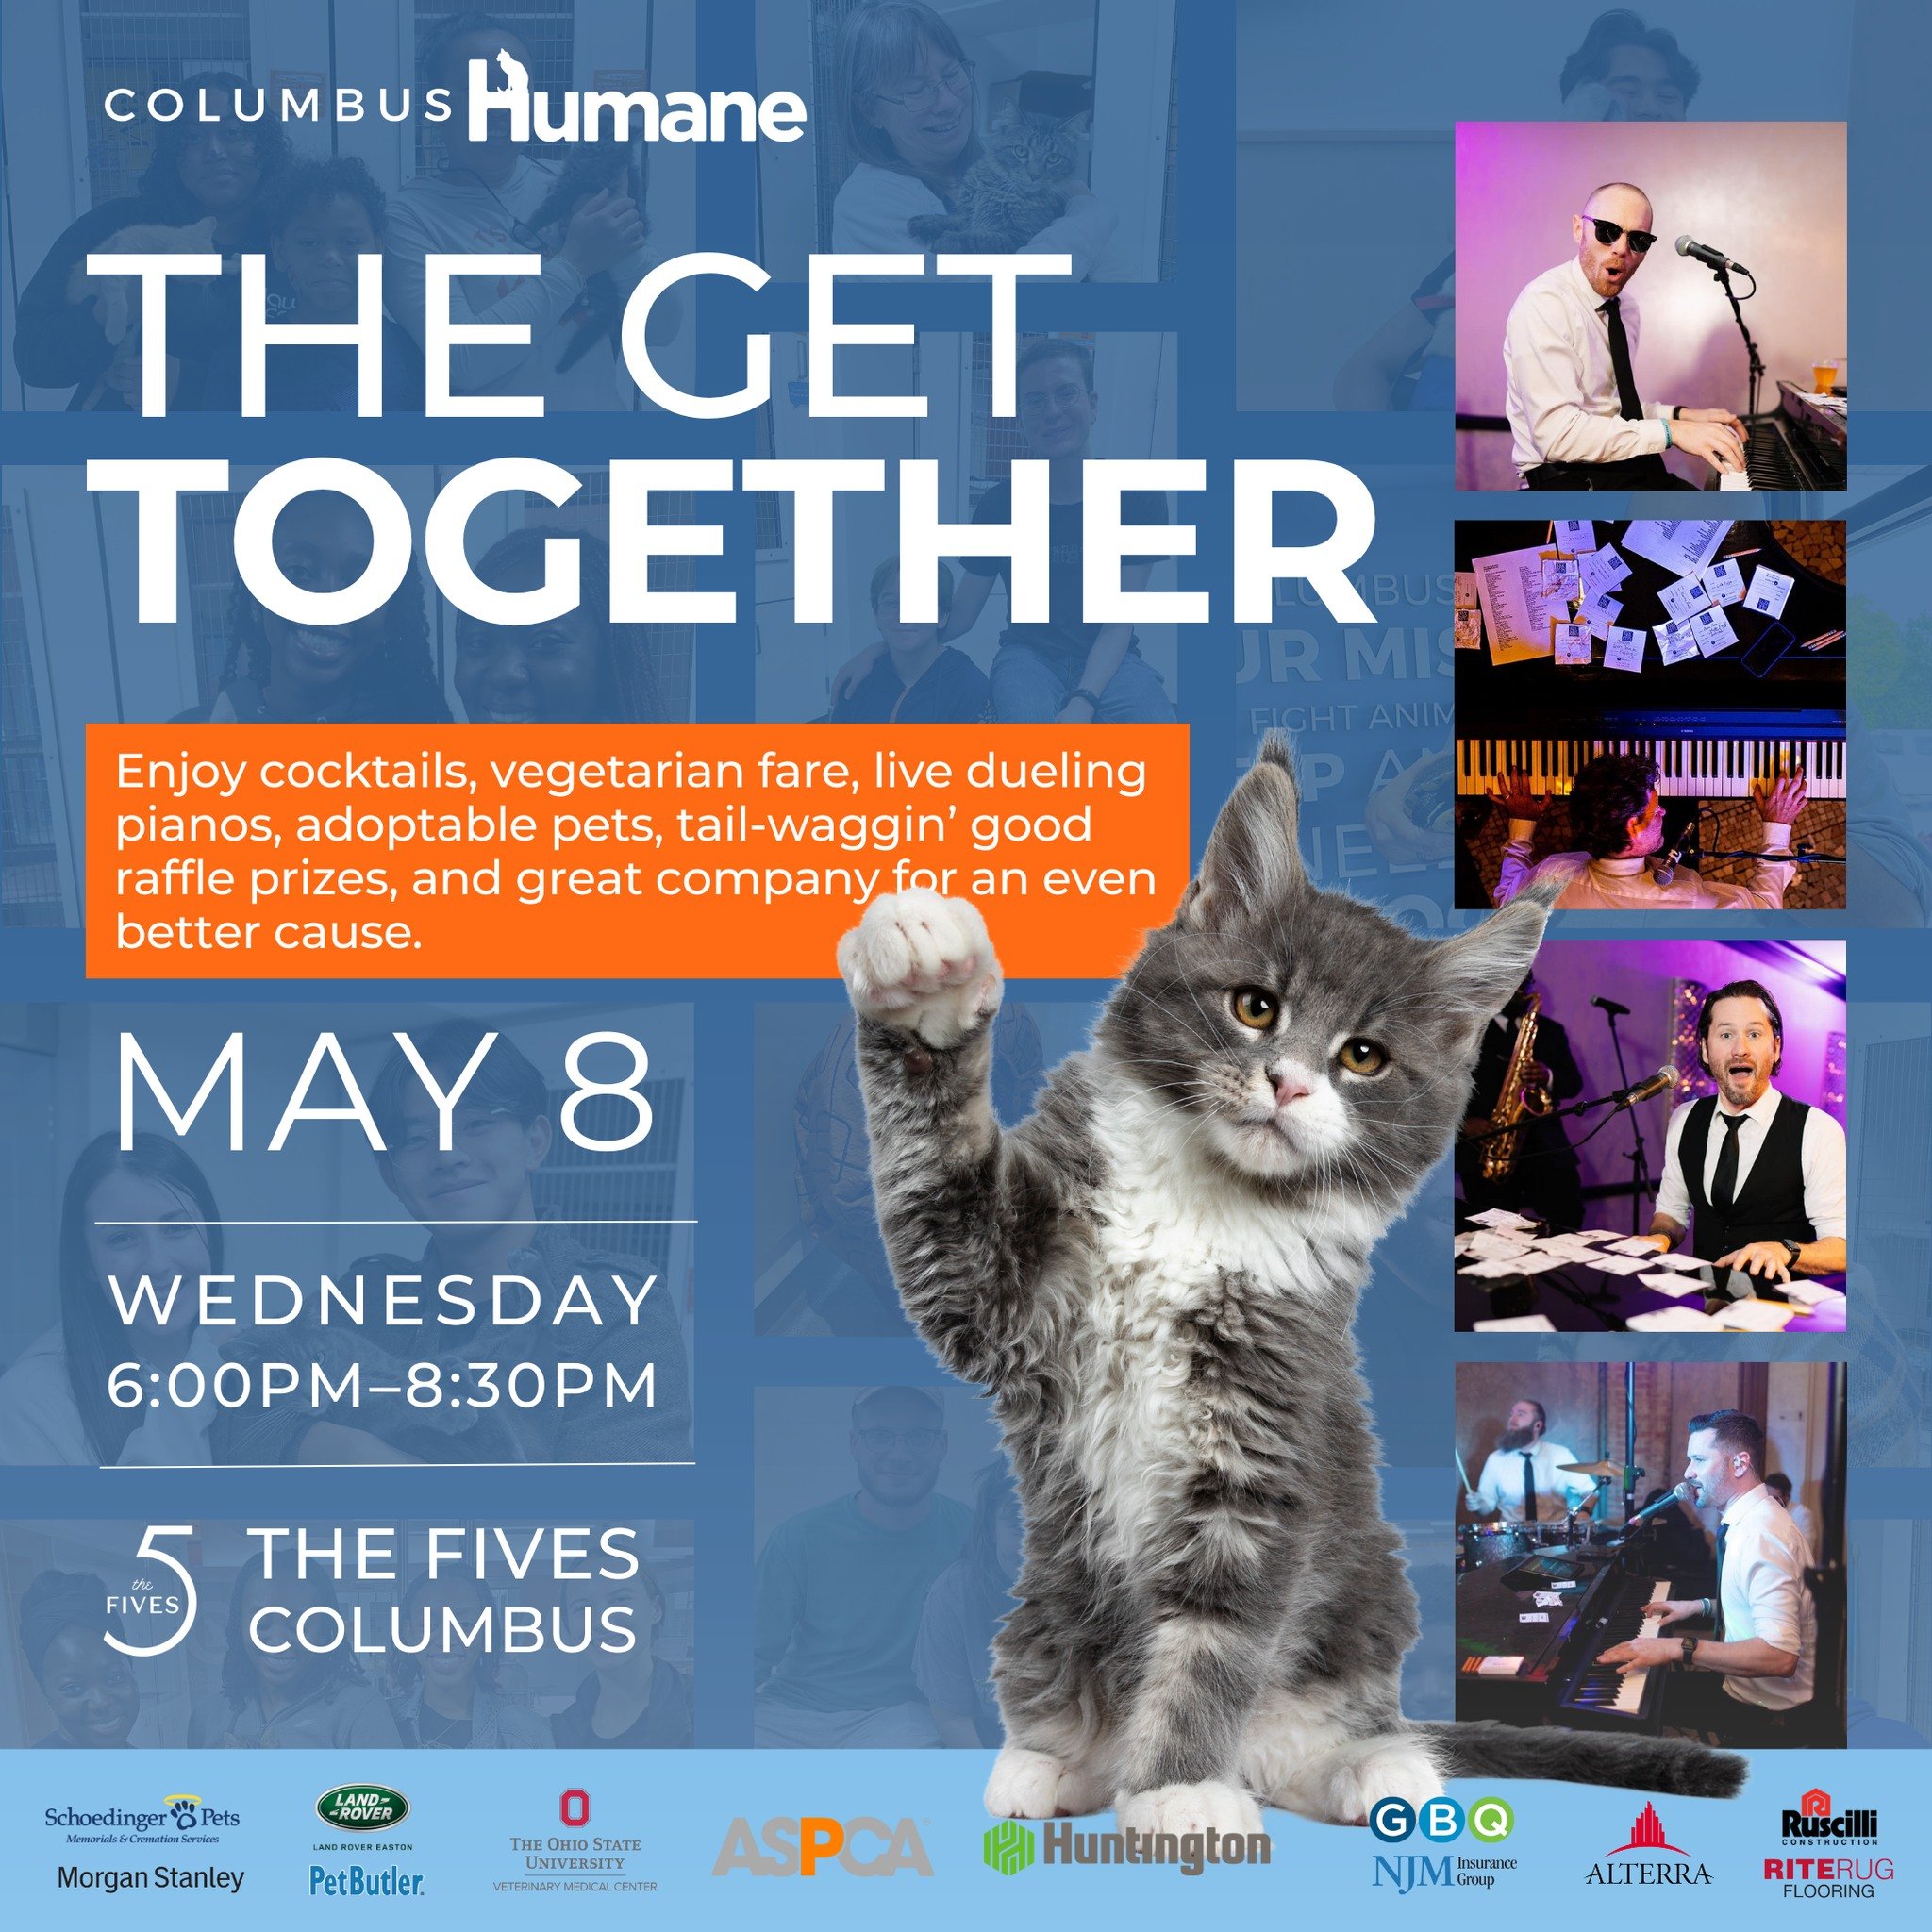 🎟 LAST DAY TO BUY TICKETS ‼ There is NO DAY-OF registration. We hope to see you at The Get Together!

BUY TICKETS: https://www.eventbrite.com/e/the-get-together-for-columbus-humane-tickets-869361151607

Celebrate the bond between people and pets wit